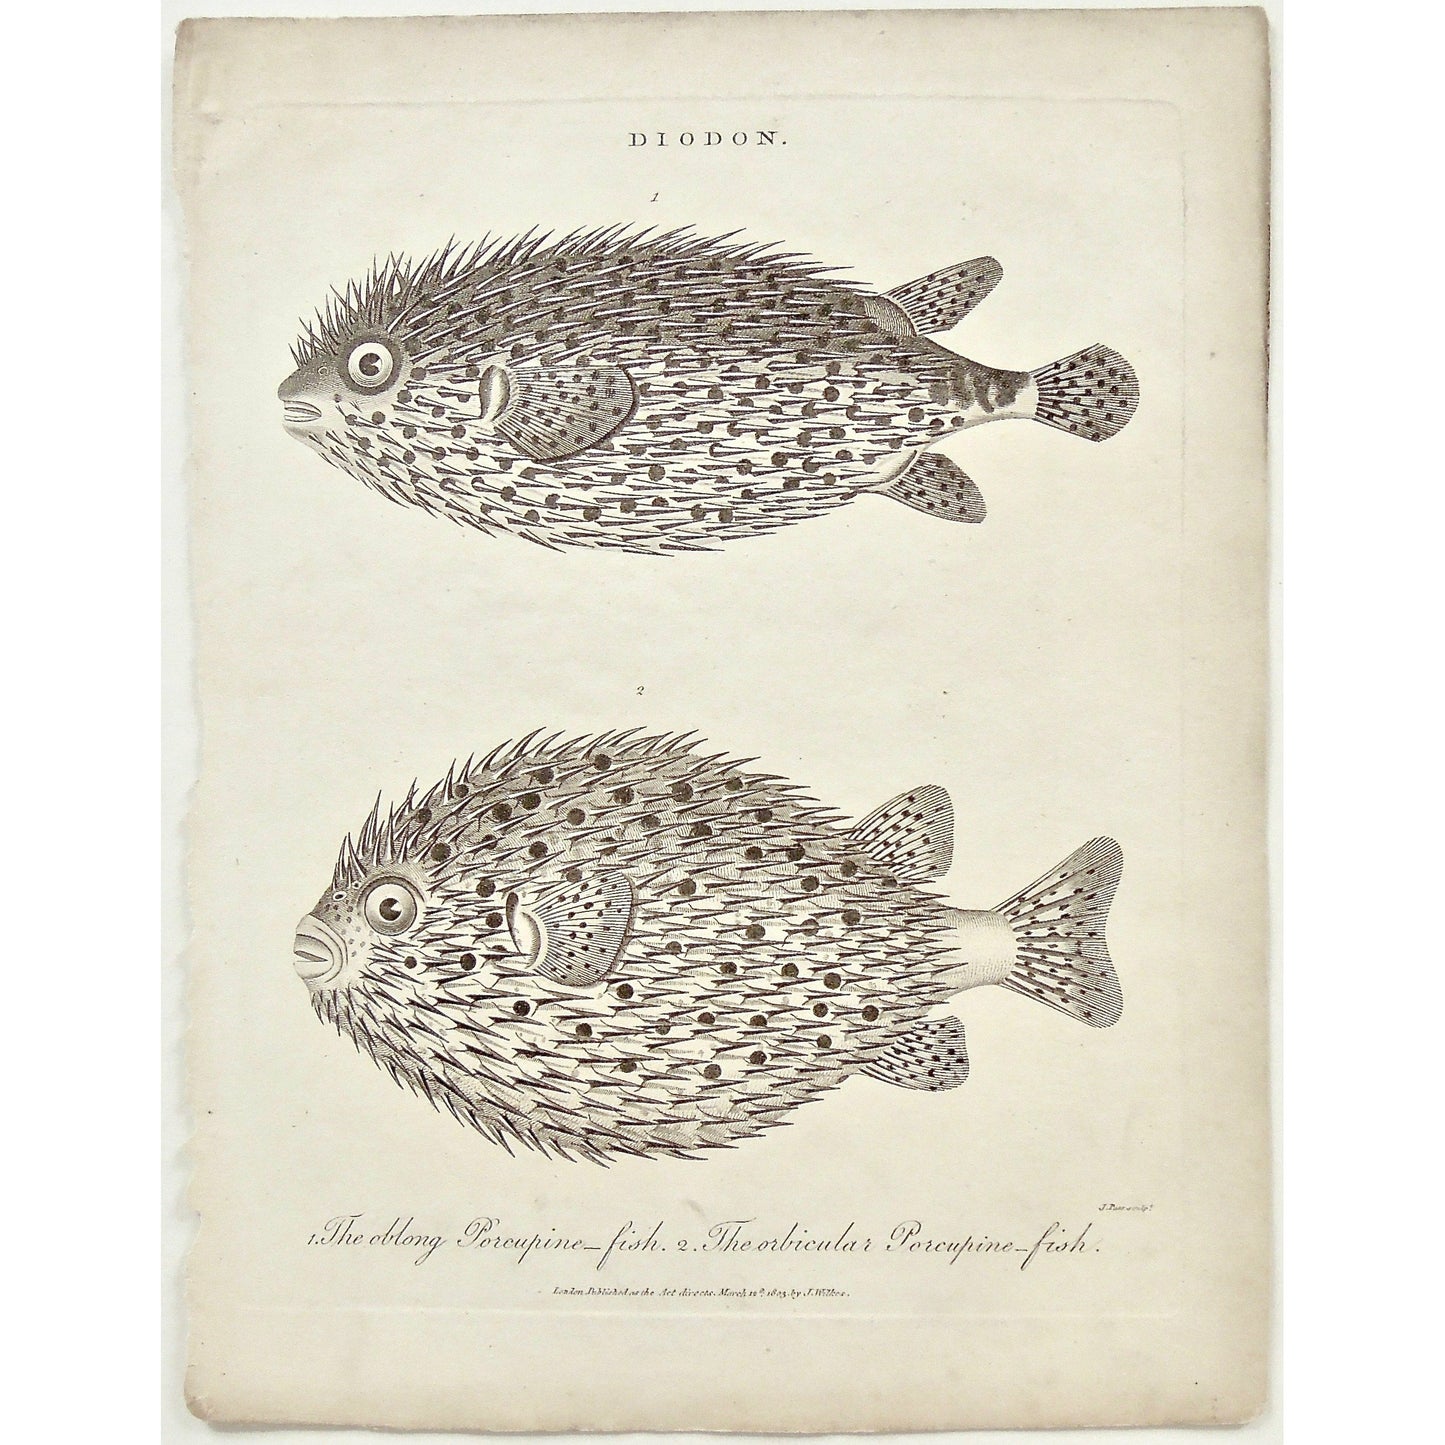 Diodon, Oblong Porcupine fish, Oblong, Porcupine fish, Porcupine, Fish, Fishing, Orbicular Porcupine fish, Orbicular, Puffer fish, blowfish, Universal Dictionary, Dictionary, Encyclopaedia Londinensis, Encyclopedia, London, Antique Print, Antique, Prints, Vintage, Vintage Art, Art, Wall art, Decor, wall decor, Home Decor, Interior design, Interior, Historical, History, Art History, design, engraving, original, authentic, Collectors, Collectable, rare books, rare, book, printmaking, print, printers, Wilkes, 